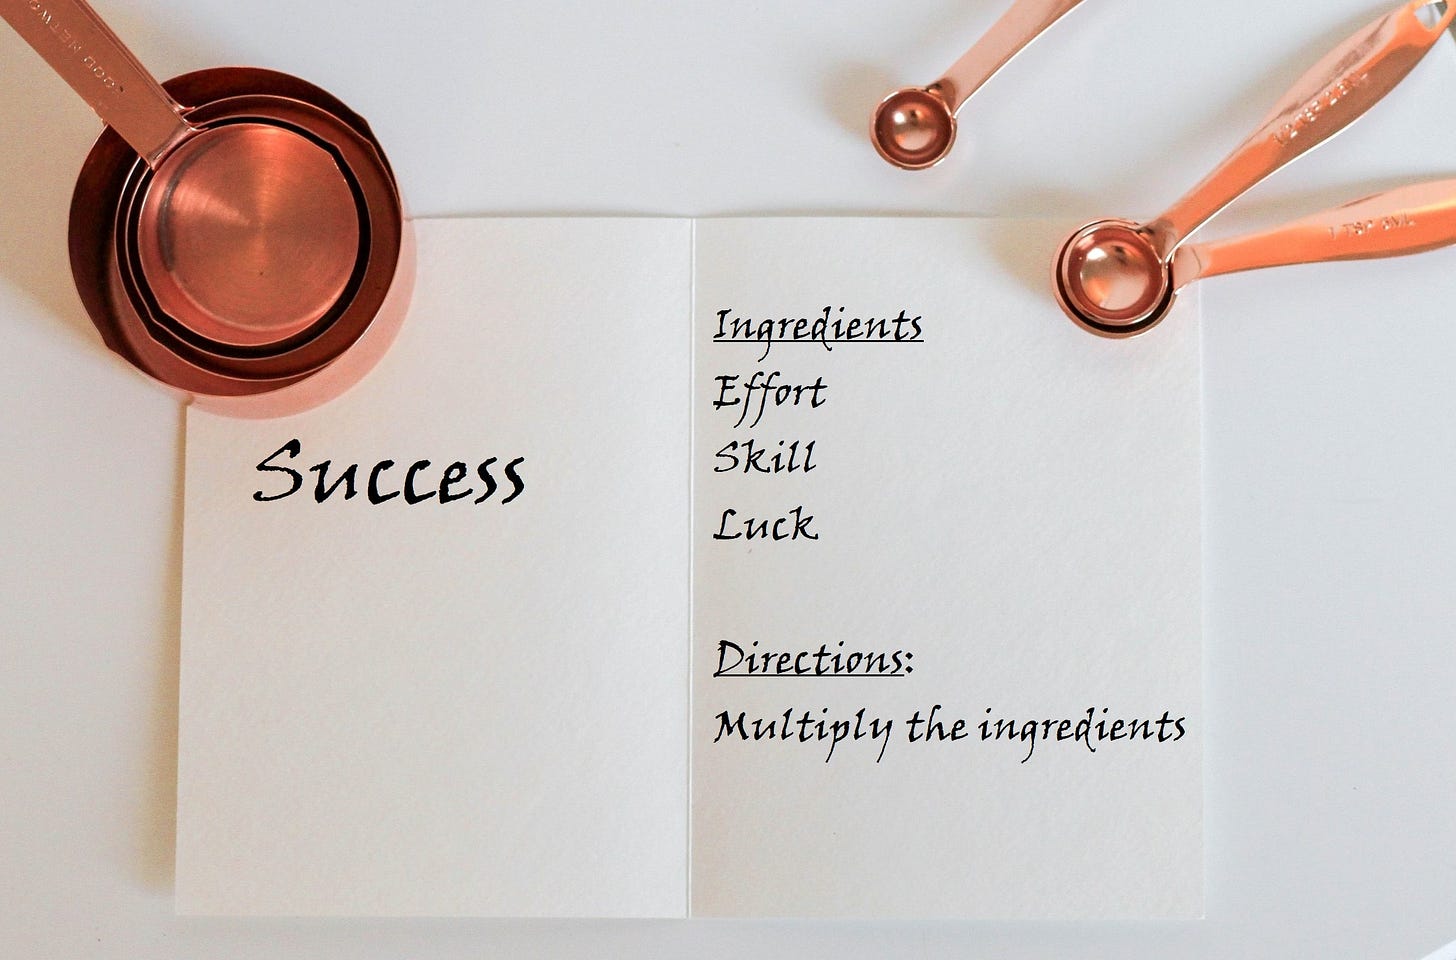 Recipe card that says: Success. Ingredients: Effort, skill, luck. Directions: Multiply the ingredients